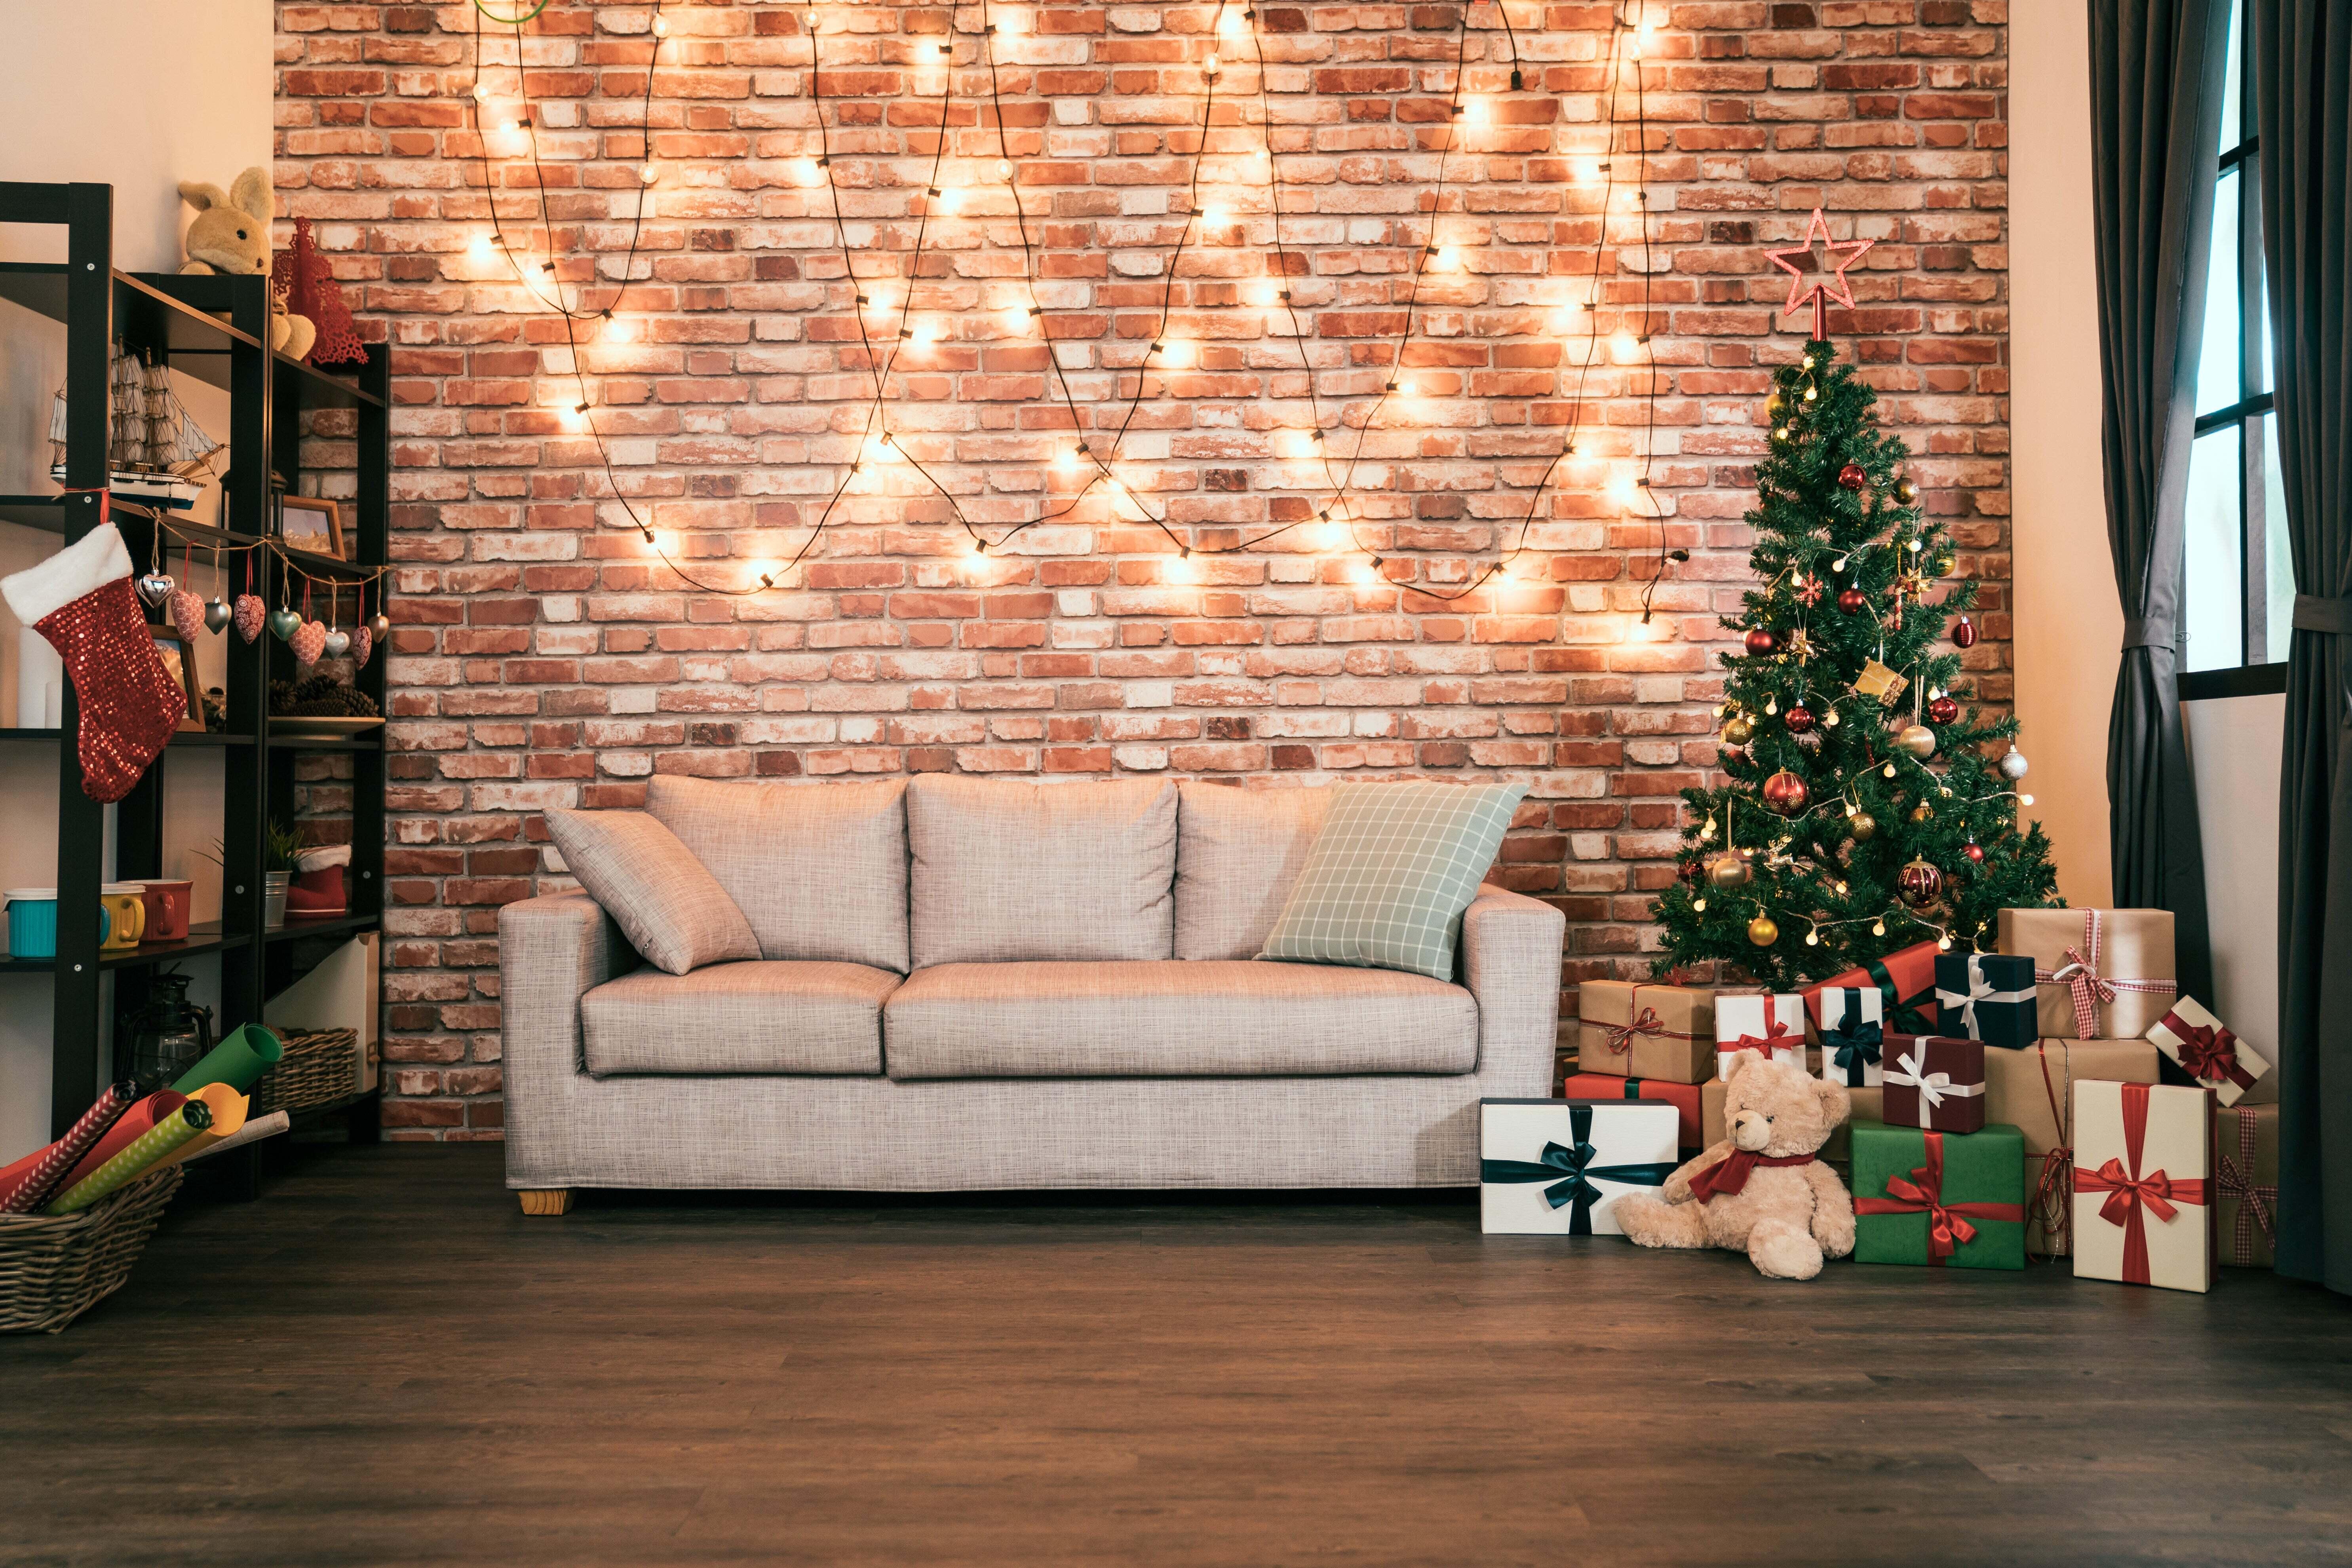 A living room decorated for Christmas with a tree, lights, and presents